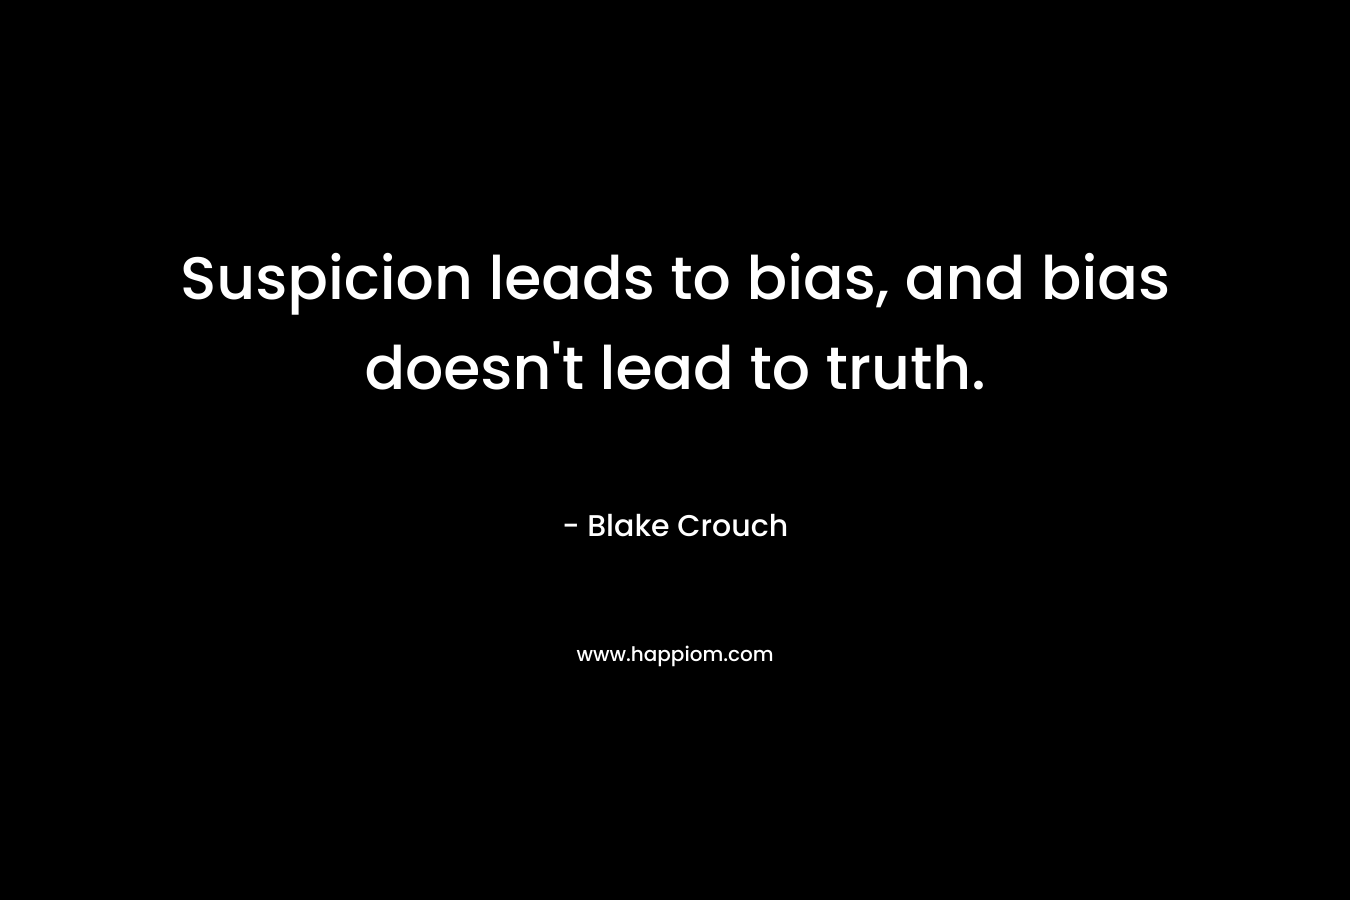 Suspicion leads to bias, and bias doesn’t lead to truth. – Blake Crouch